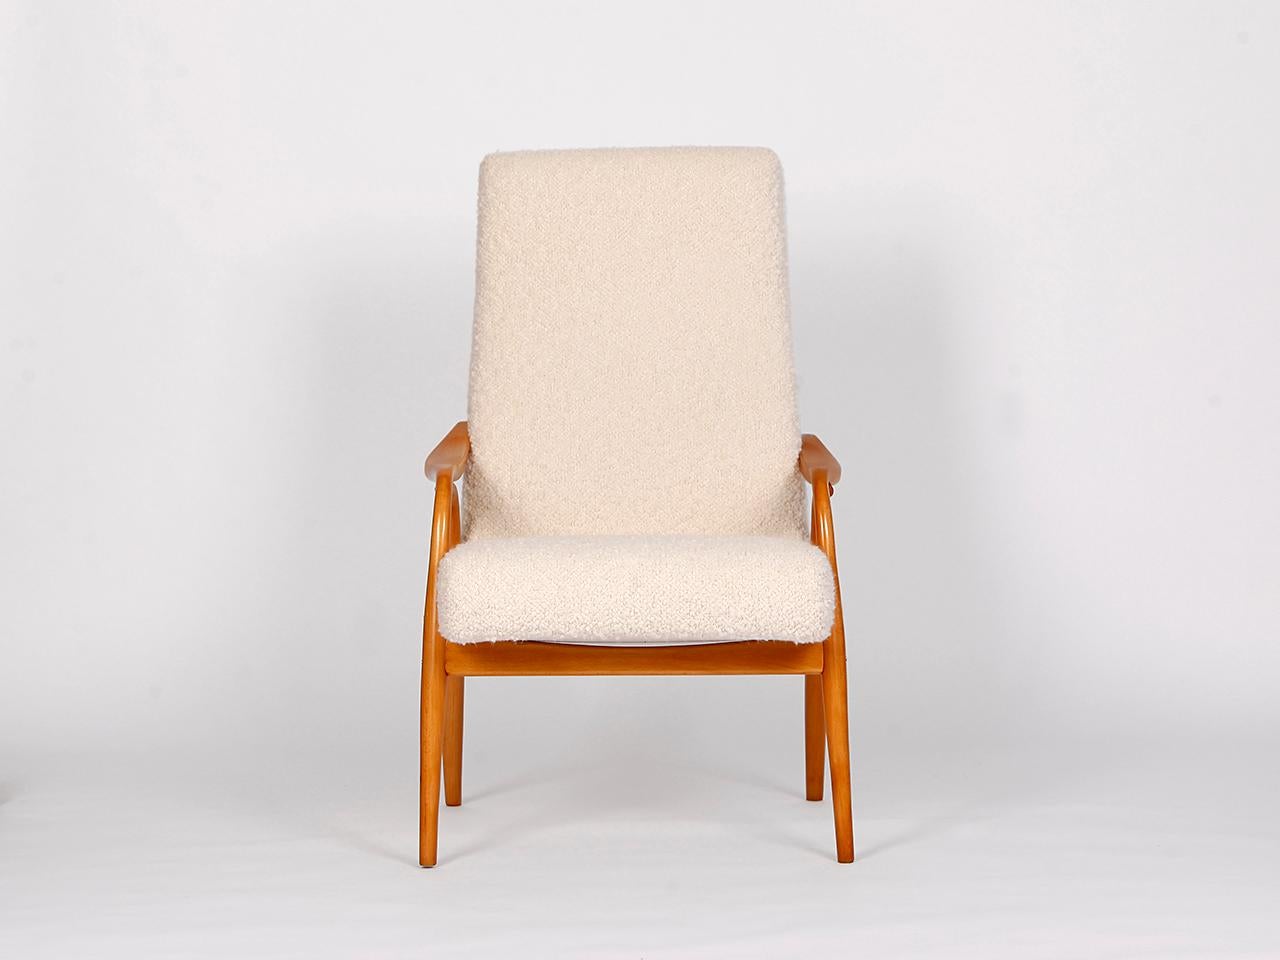 Mid century Boucle armchair by Antonin Suman for Ton, from the 1950s, manufactured in former Czechoslovakia. Newly varnished wooden parts, solid coconut fiber upholstery. Fully restored. With a wonderfully soft english cover boucle fabric made of